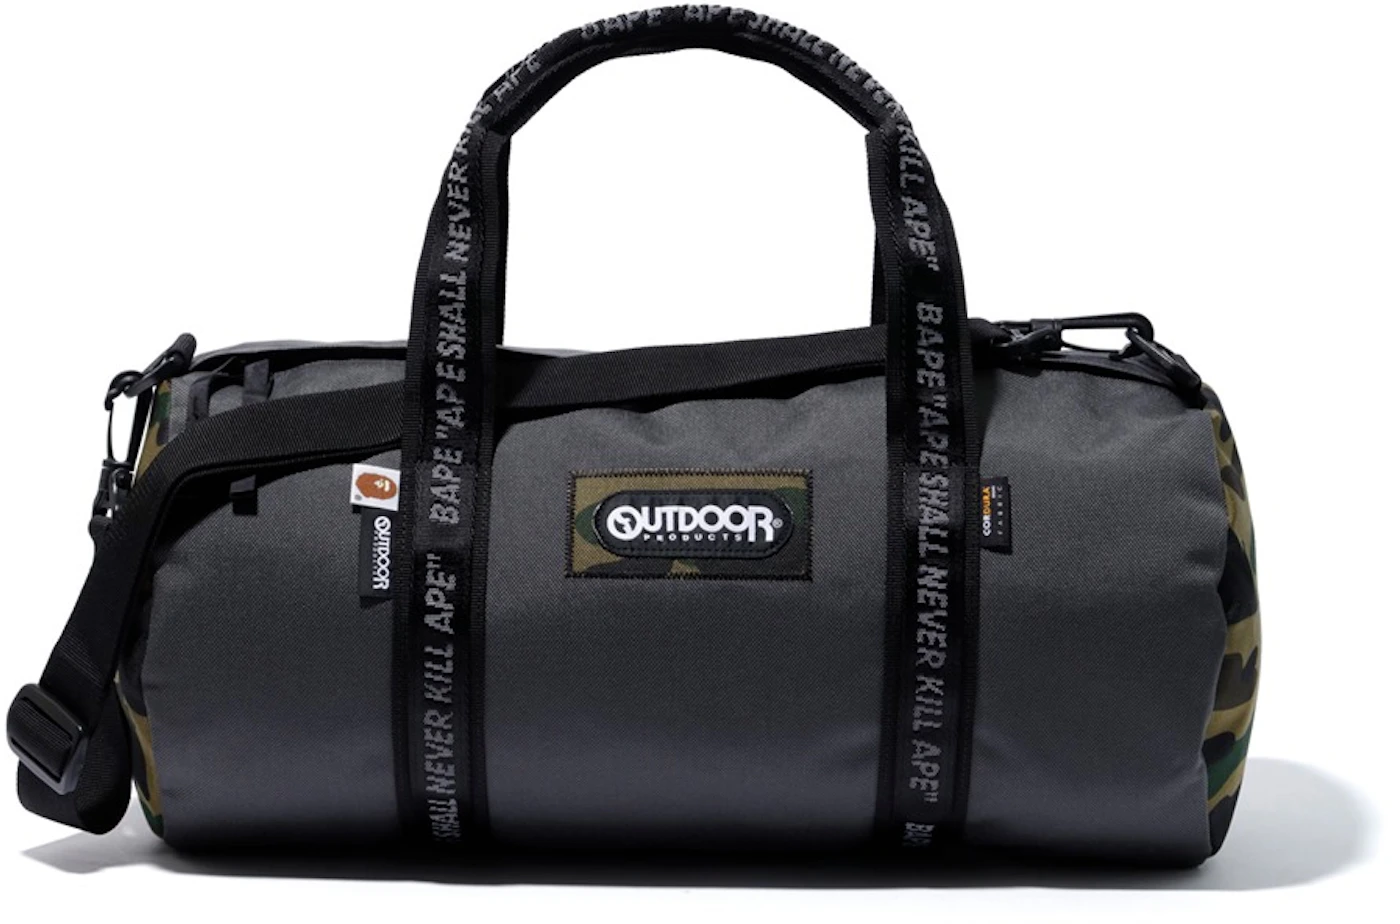 BAPE x Outdoors Products Drum Bag Grey - FW19 - US